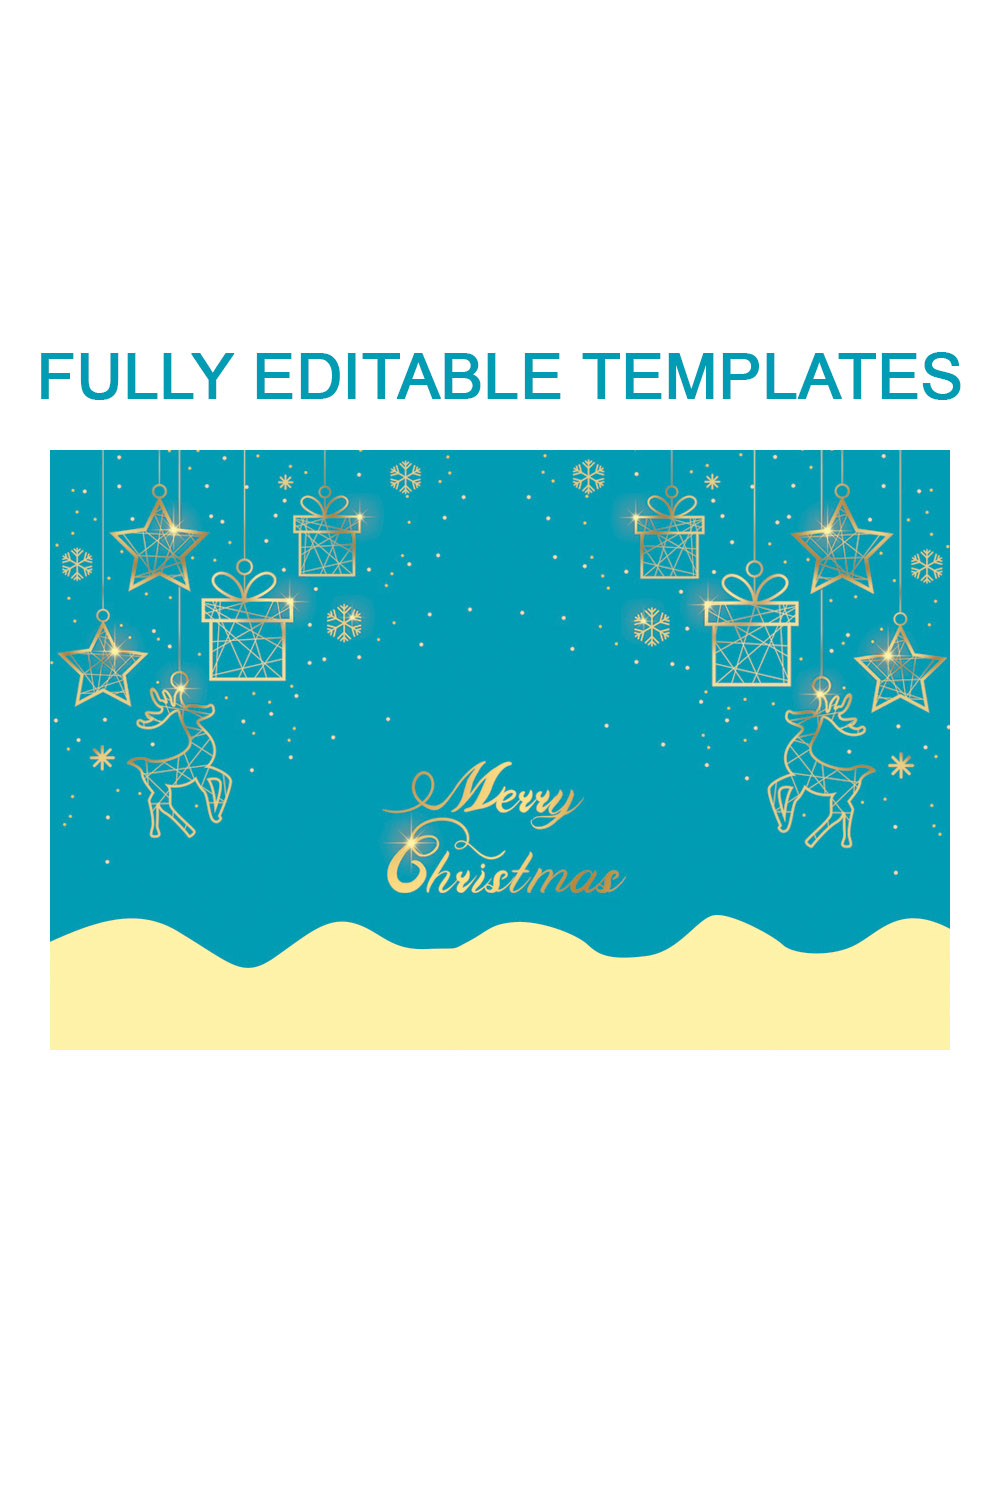 Christmas Card Fully Editable Templates pinterest preview image.